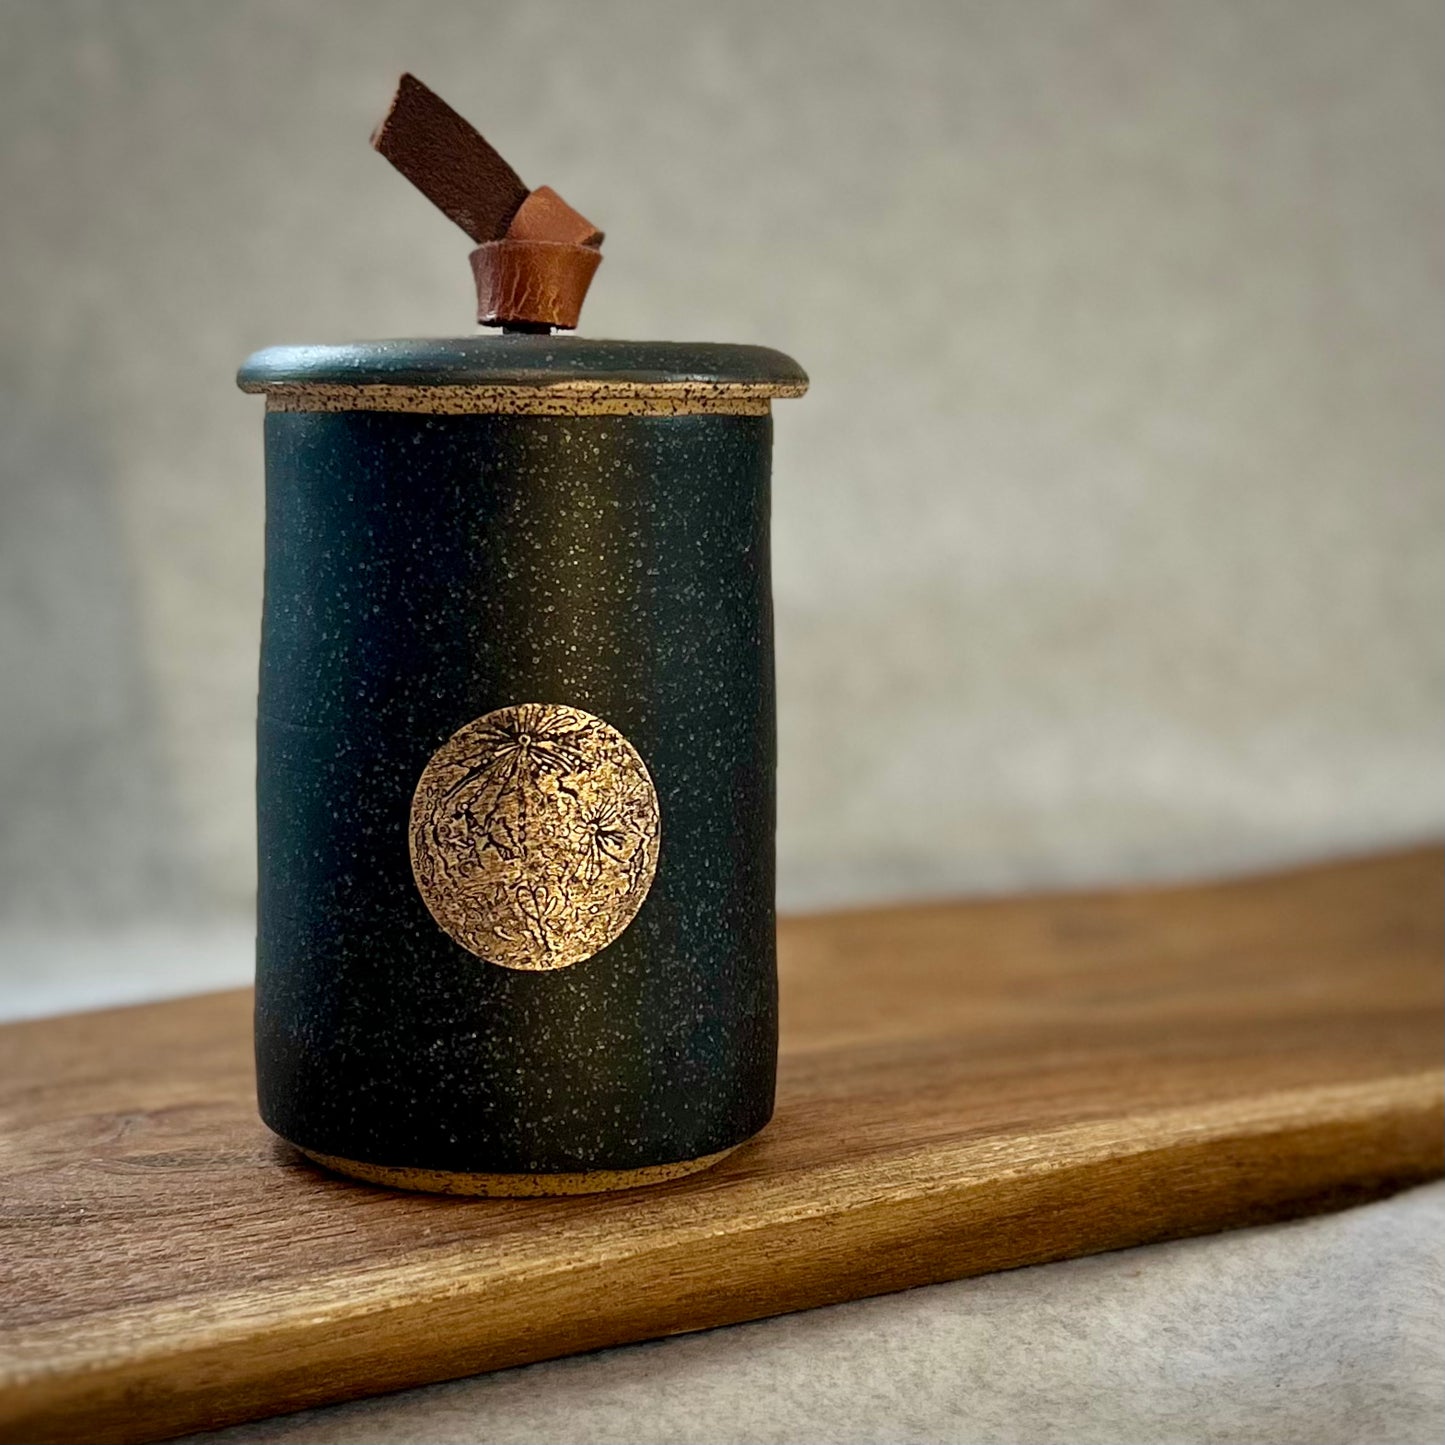 ranch lidded jar with leather handle / 22k gold moon